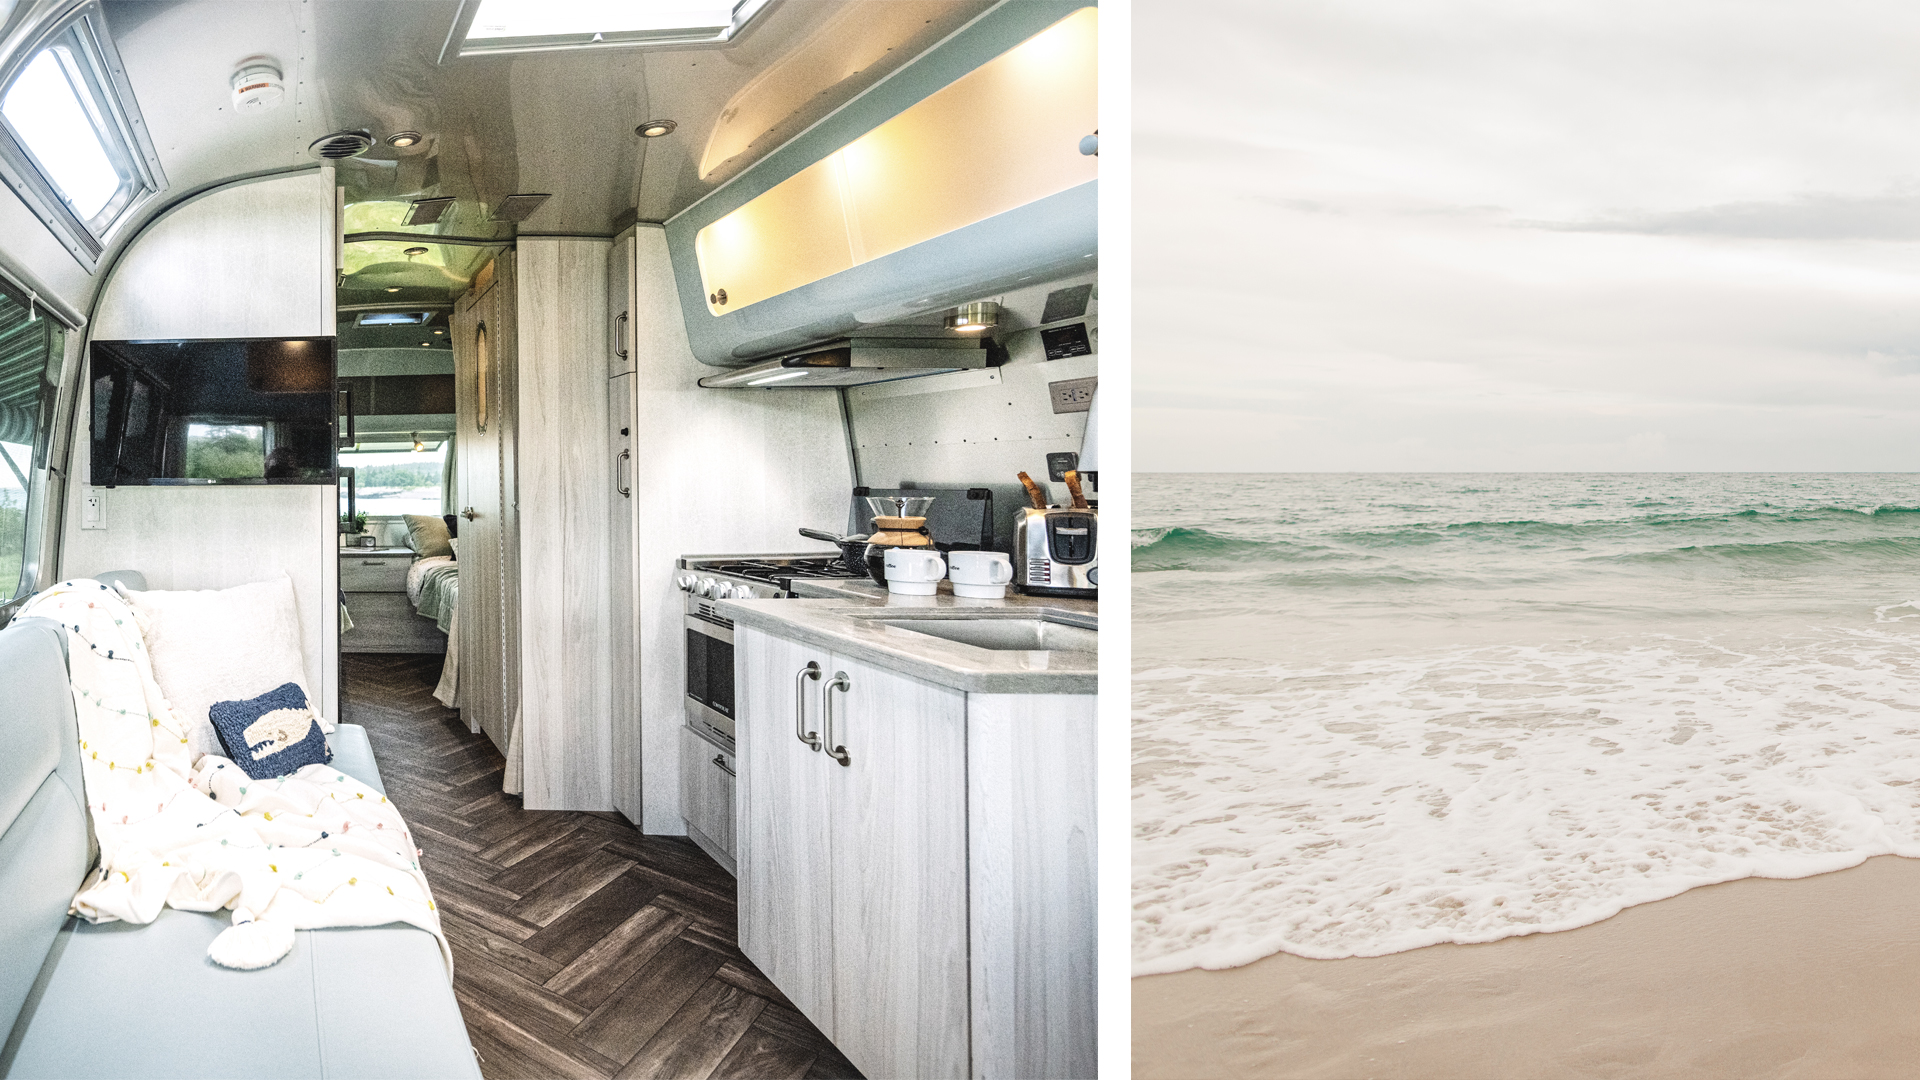 A collage of two images comparing the Airstream International travel trailer to the ocean on a coast.